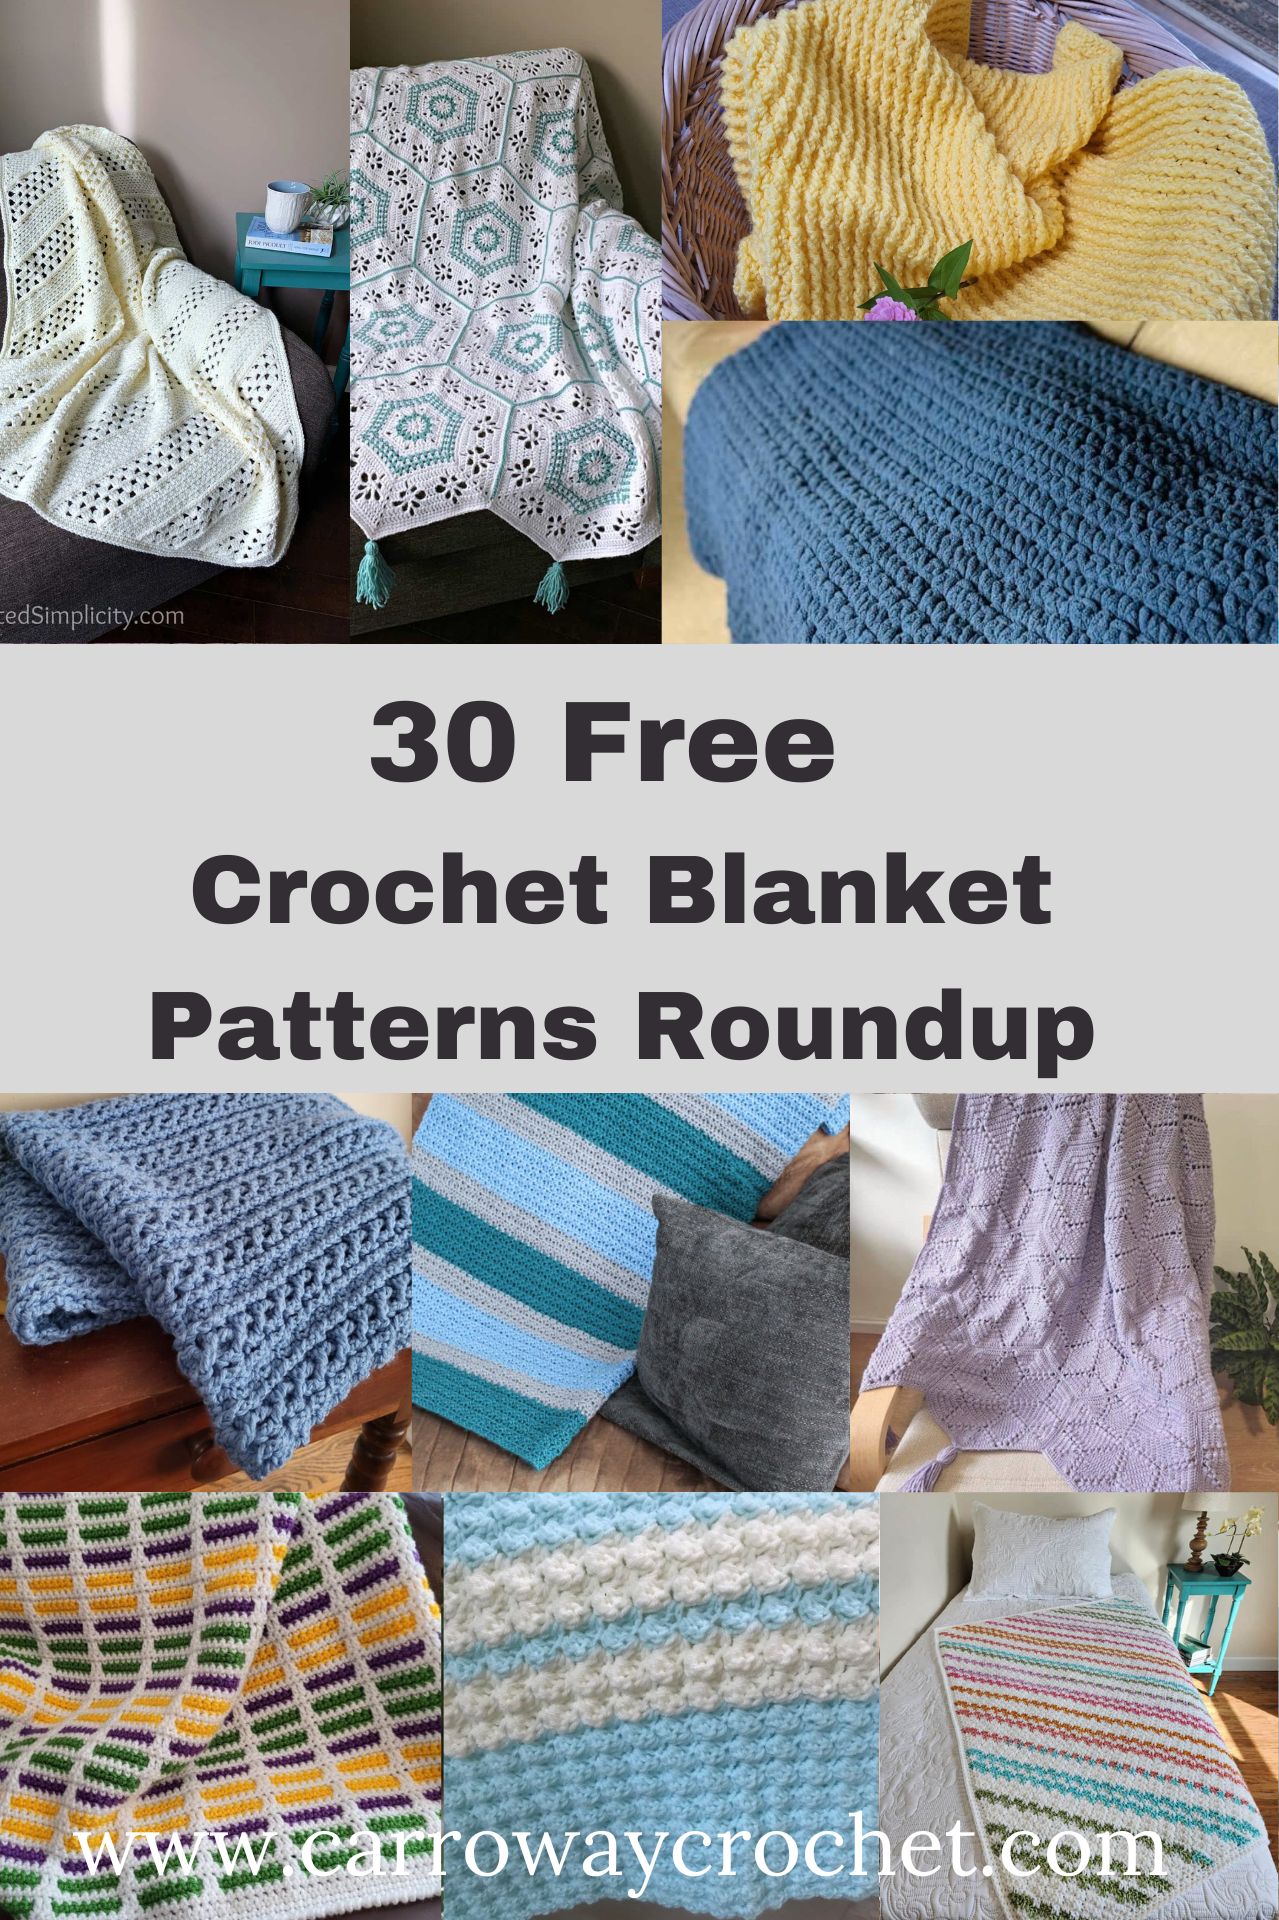 30 Beautiful Crochet Baby Blanket Patterns You Must See!